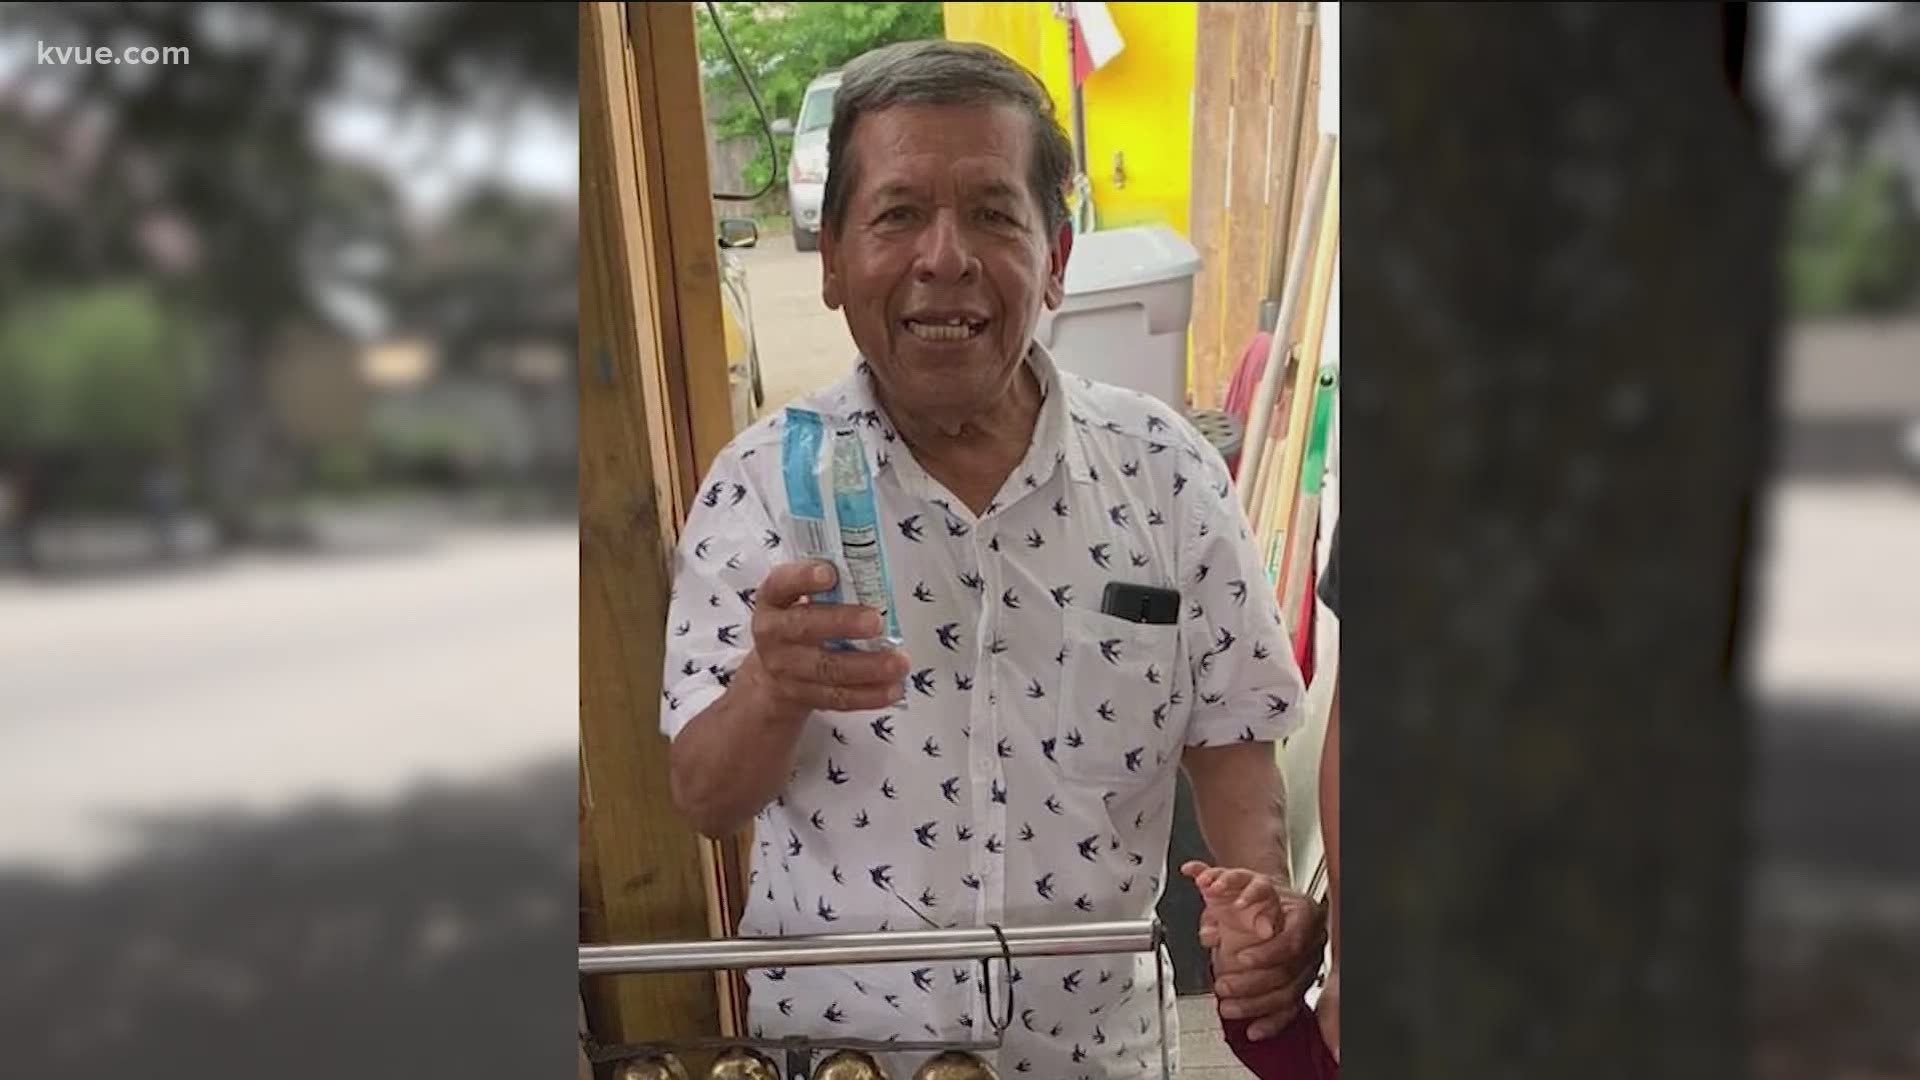 Austin police are trying to find the attackers who killed an ice cream vendor while he was out selling treats. Luis de Leon spoke to the victim's family.